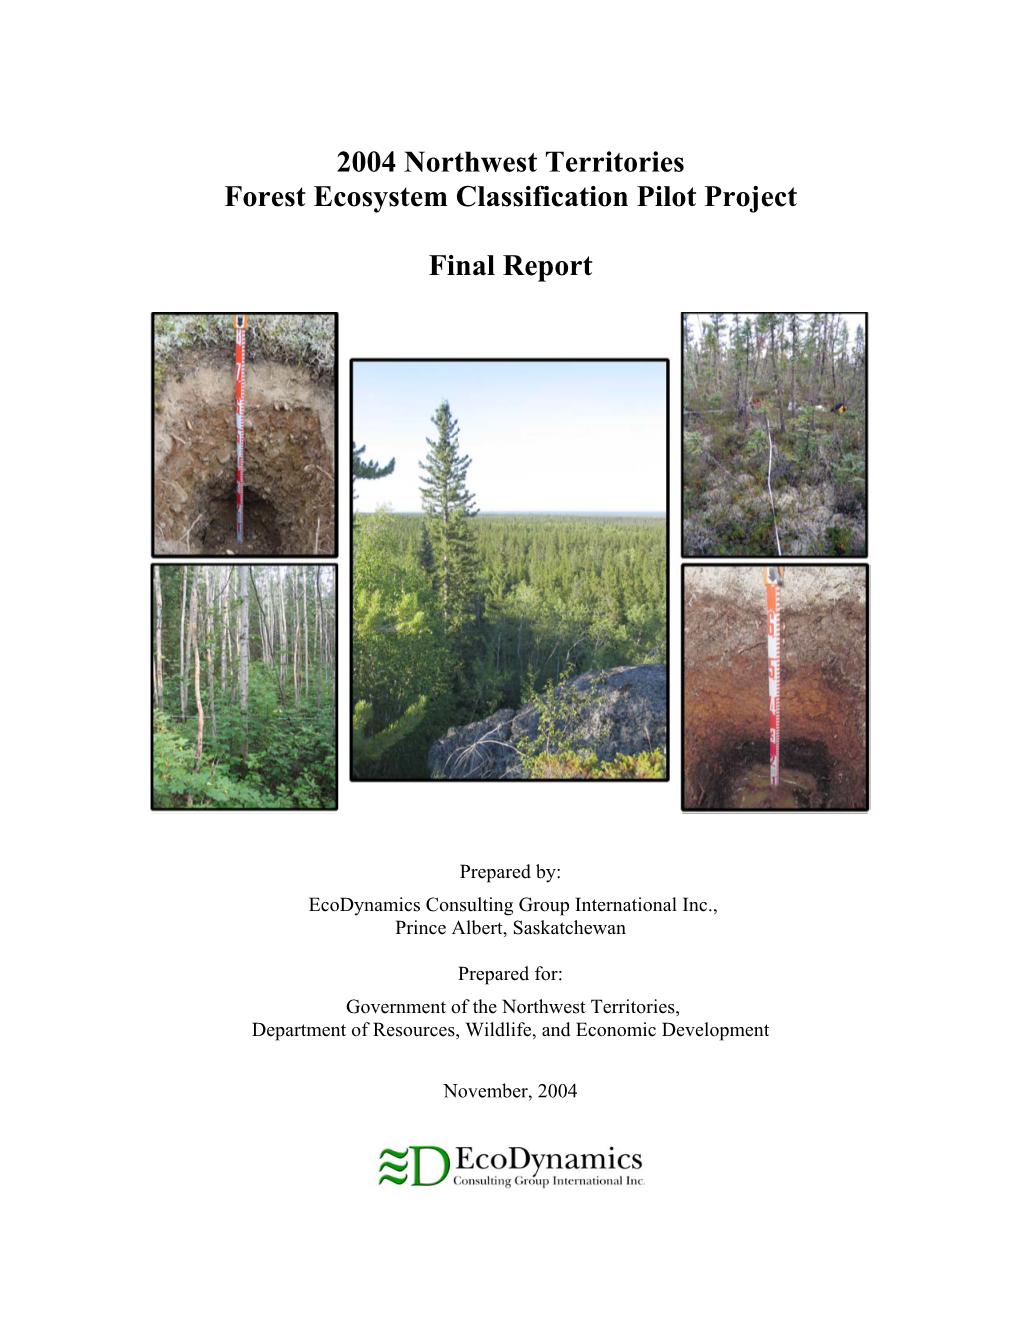 2004 Northwest Territories Forest Ecosystem Classification Pilot Project